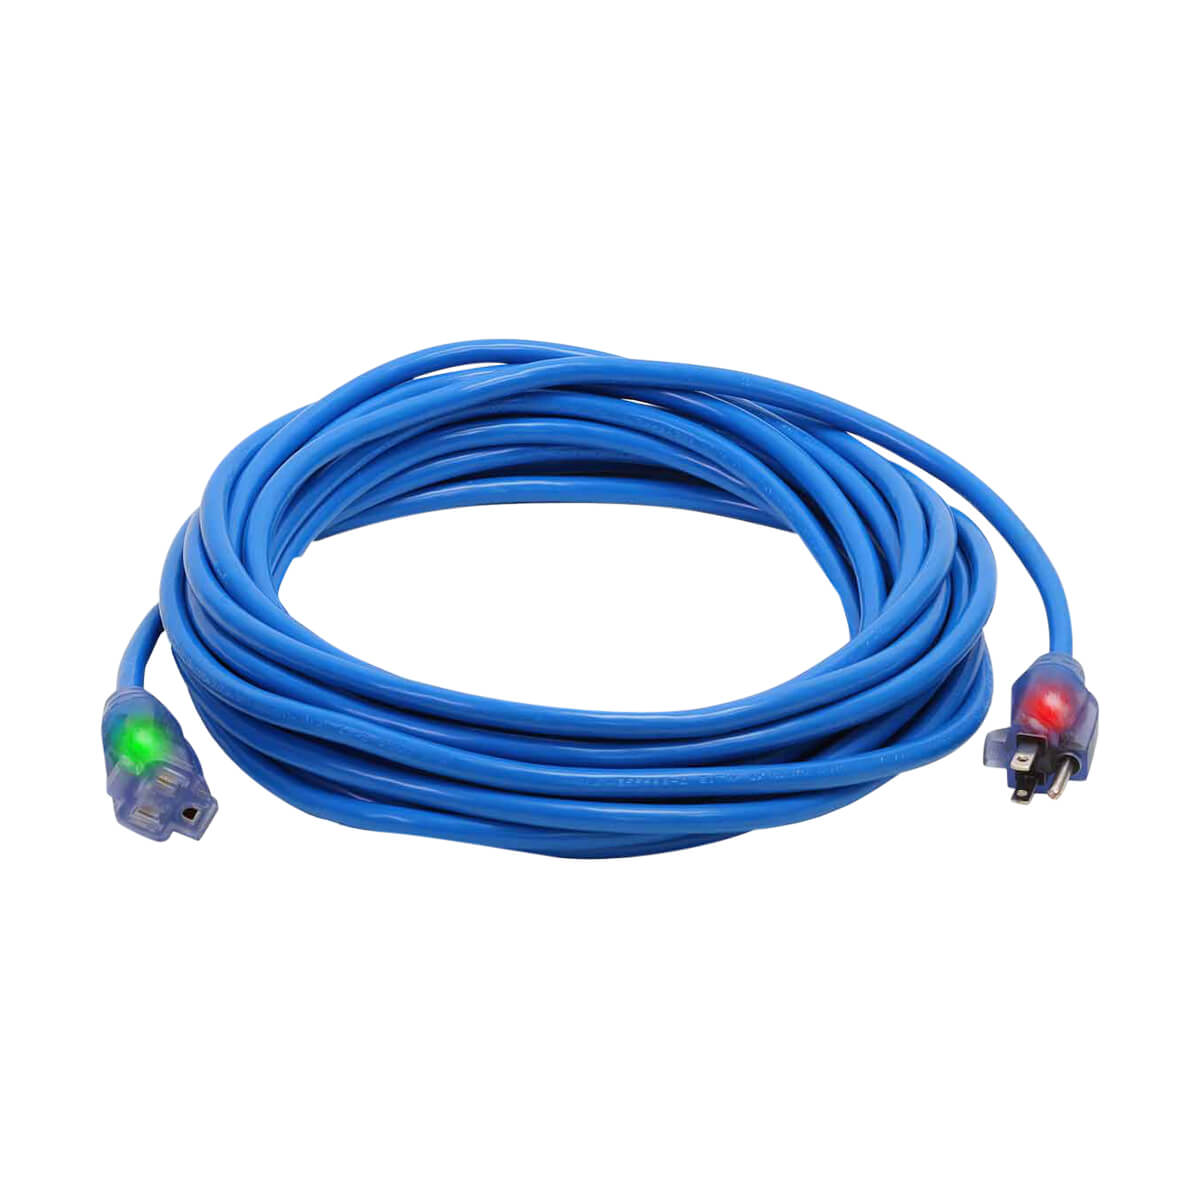 35-ft Pro Glo Extension Cords 14/3 - CGM - Blue